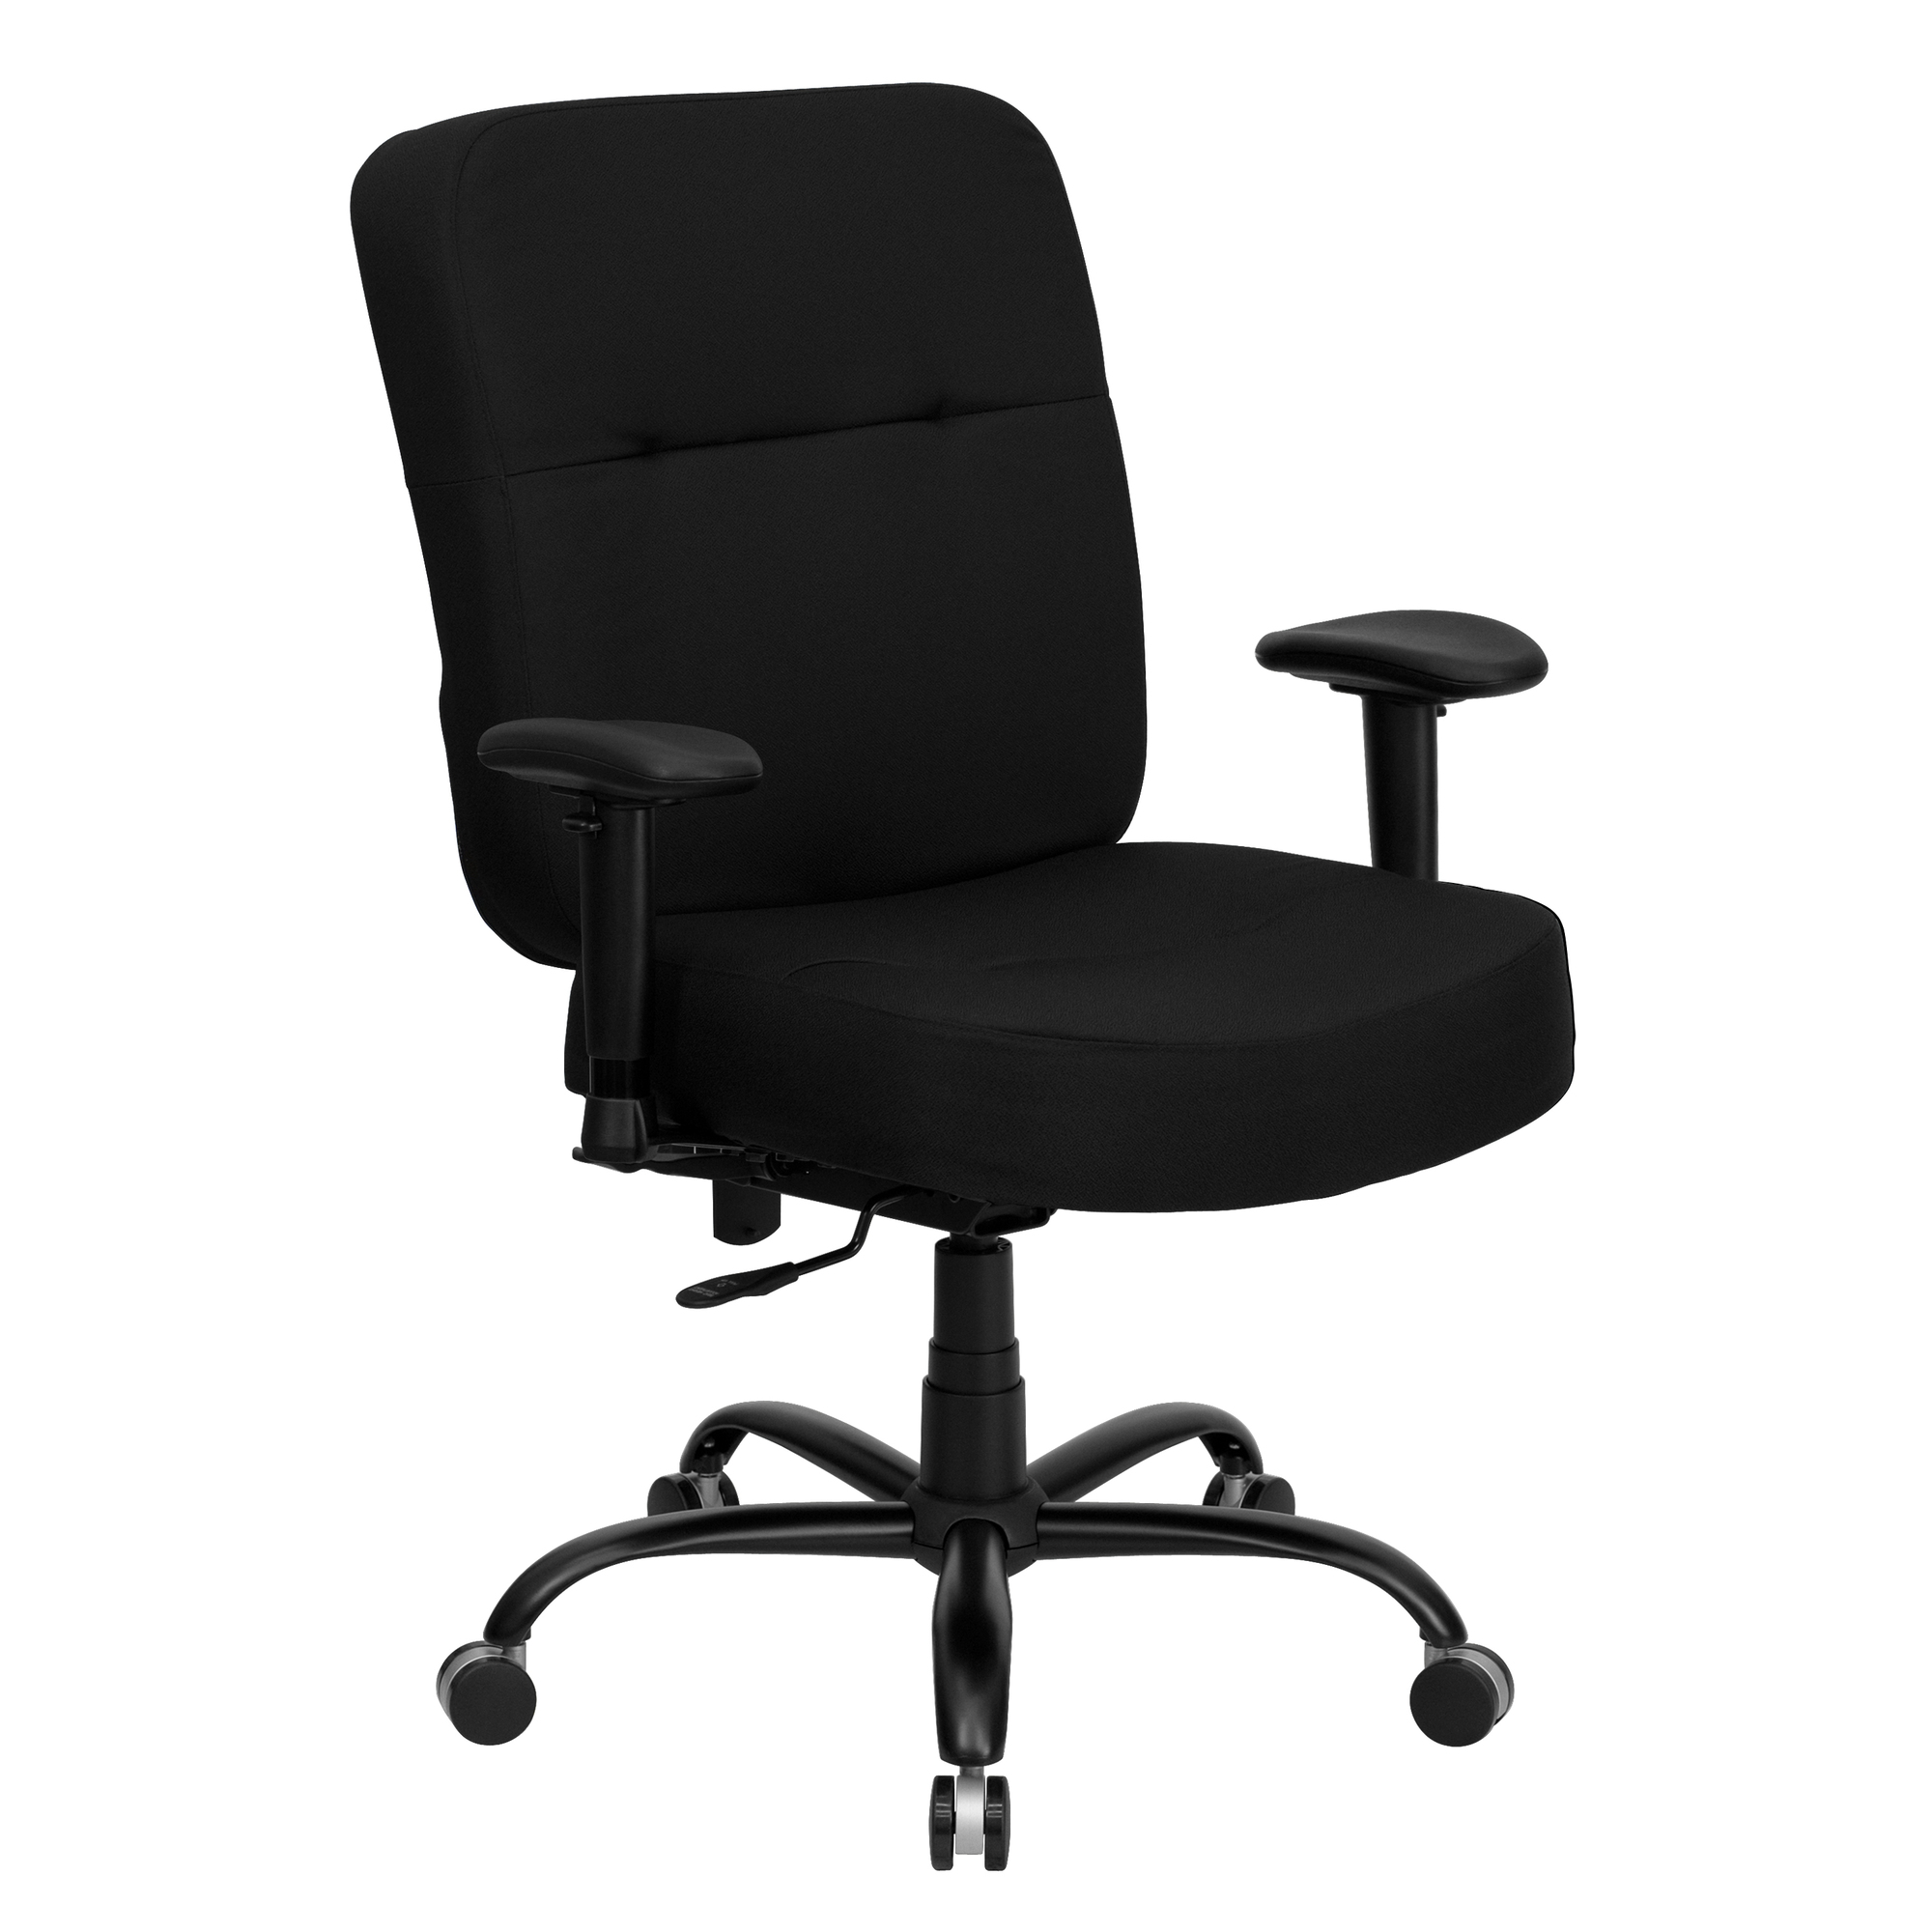 400 lb. Rated High Back Black Fabric Office Chair, Primary Color Black, Included (qty.) 1, Model - Flash Furniture WL735SYGBKA